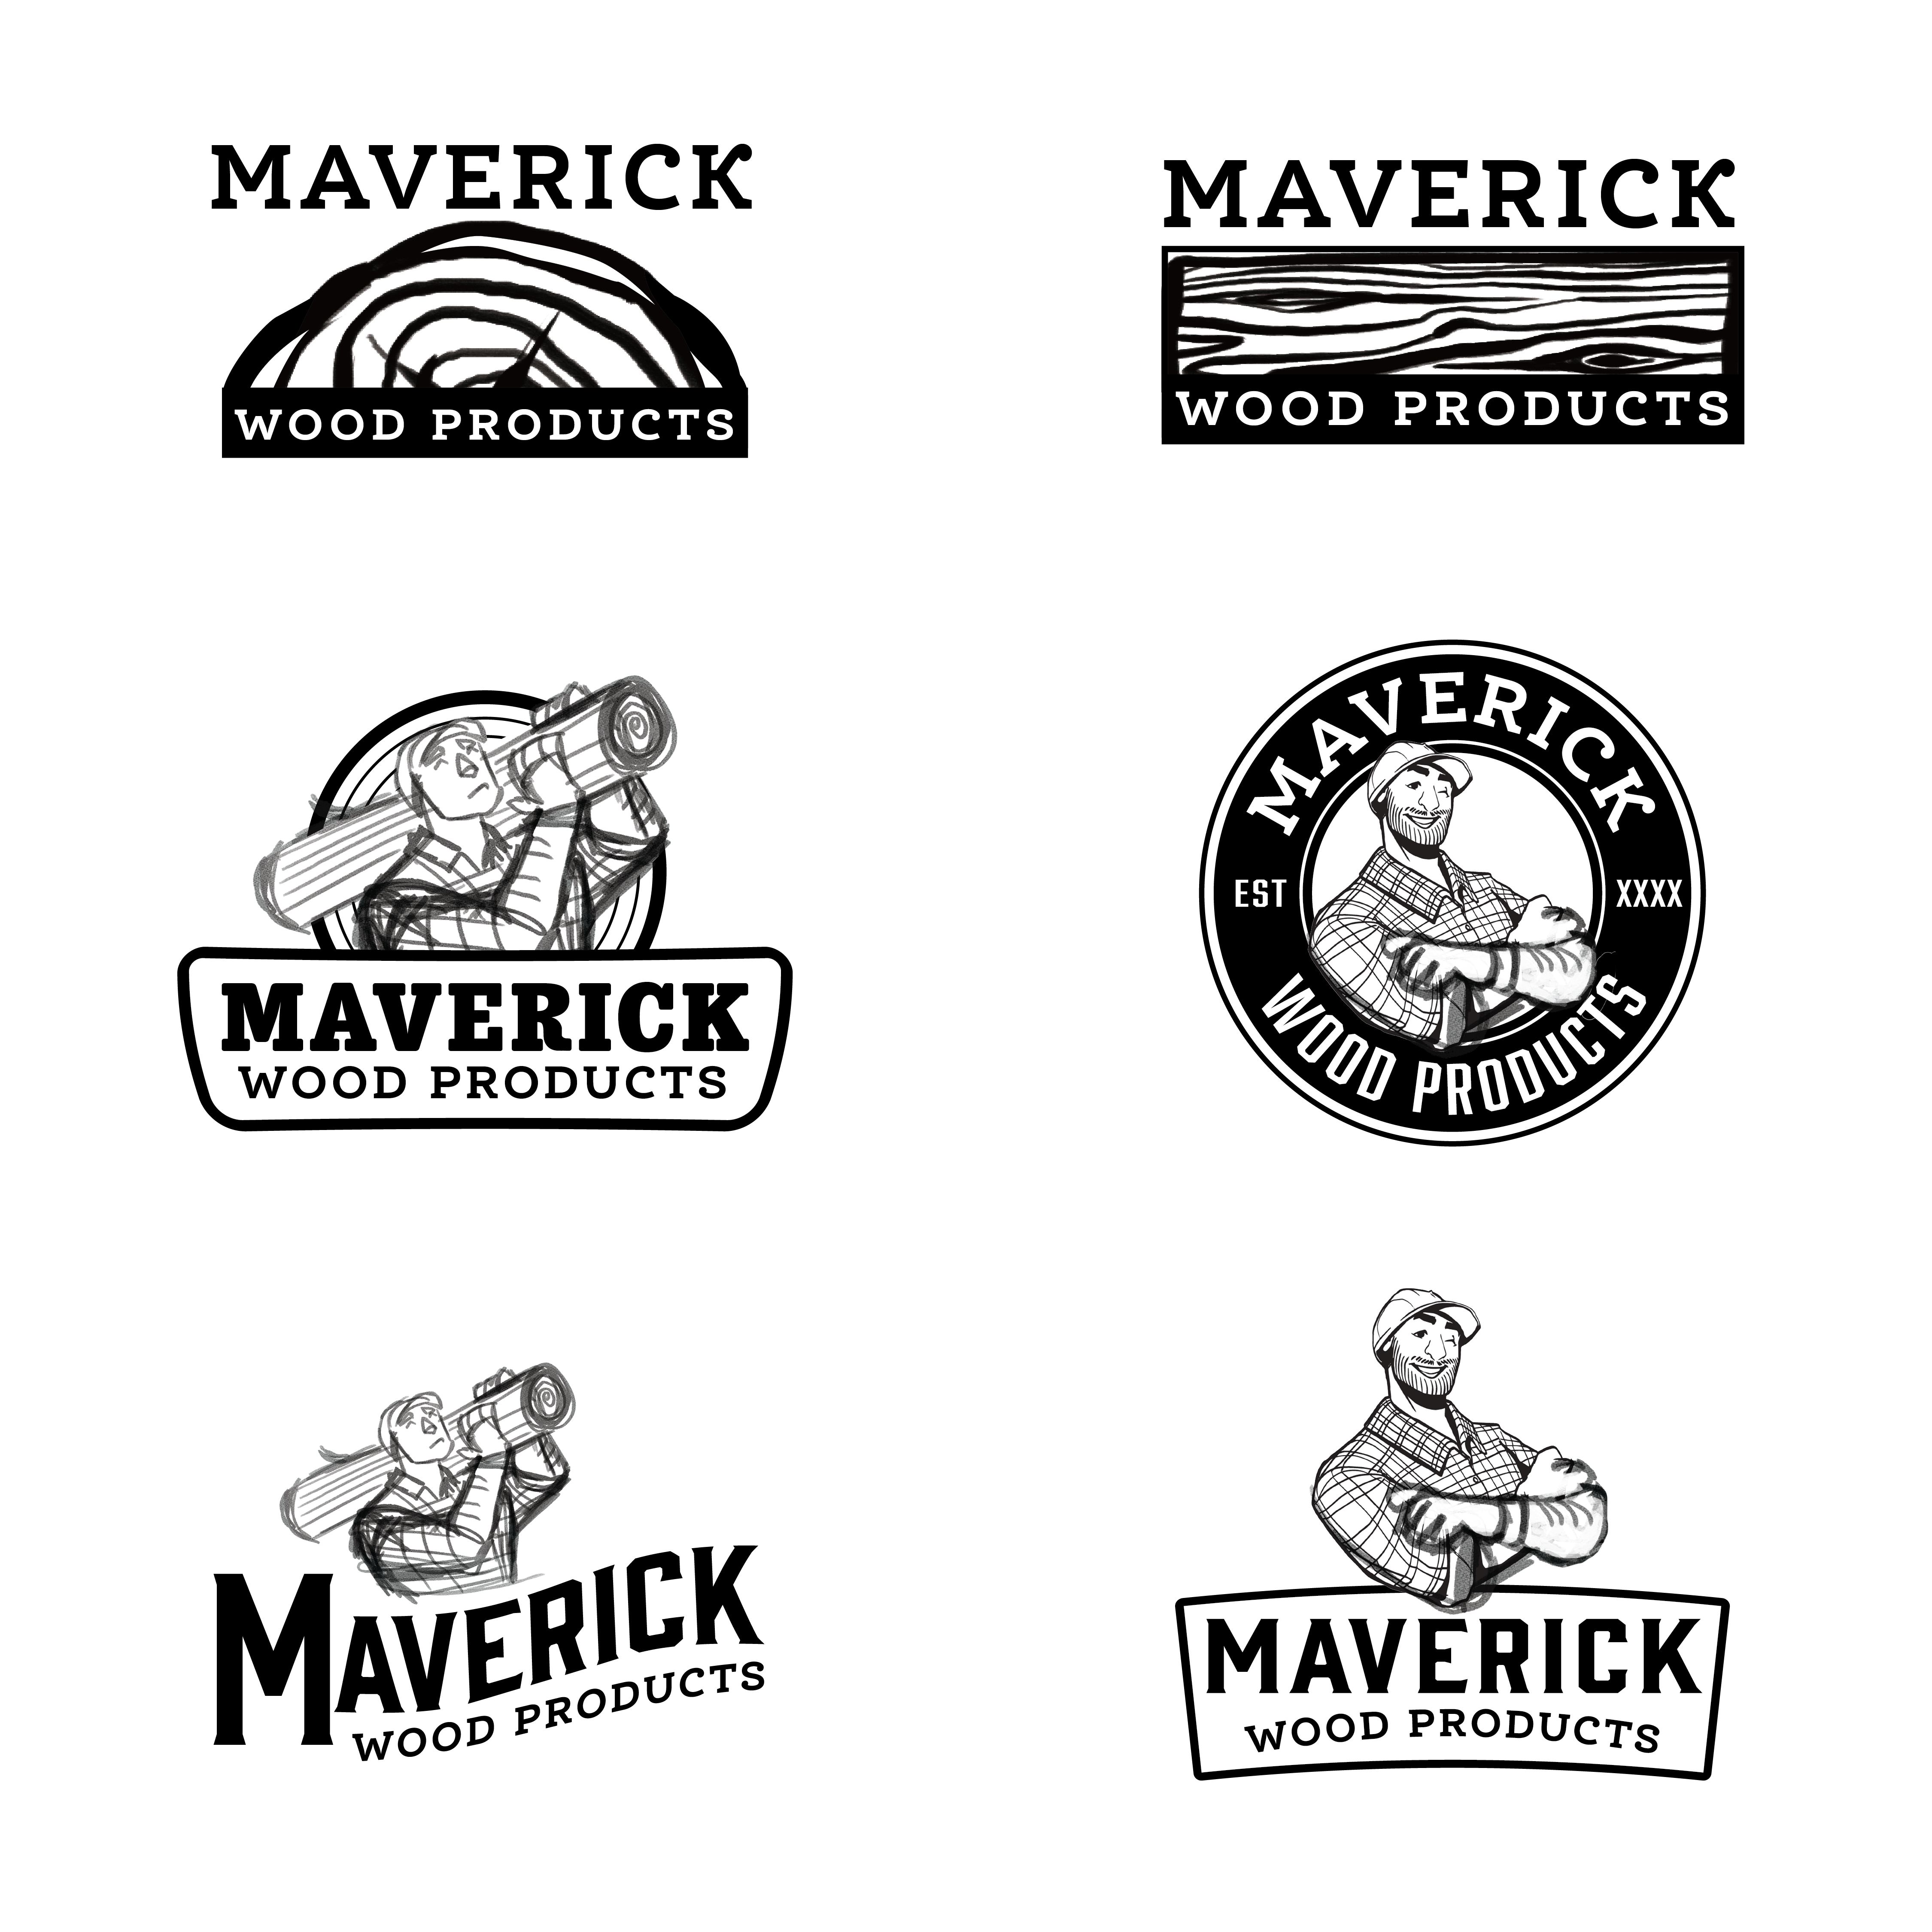 Maverick Wood Products - Initial Logo Sketches